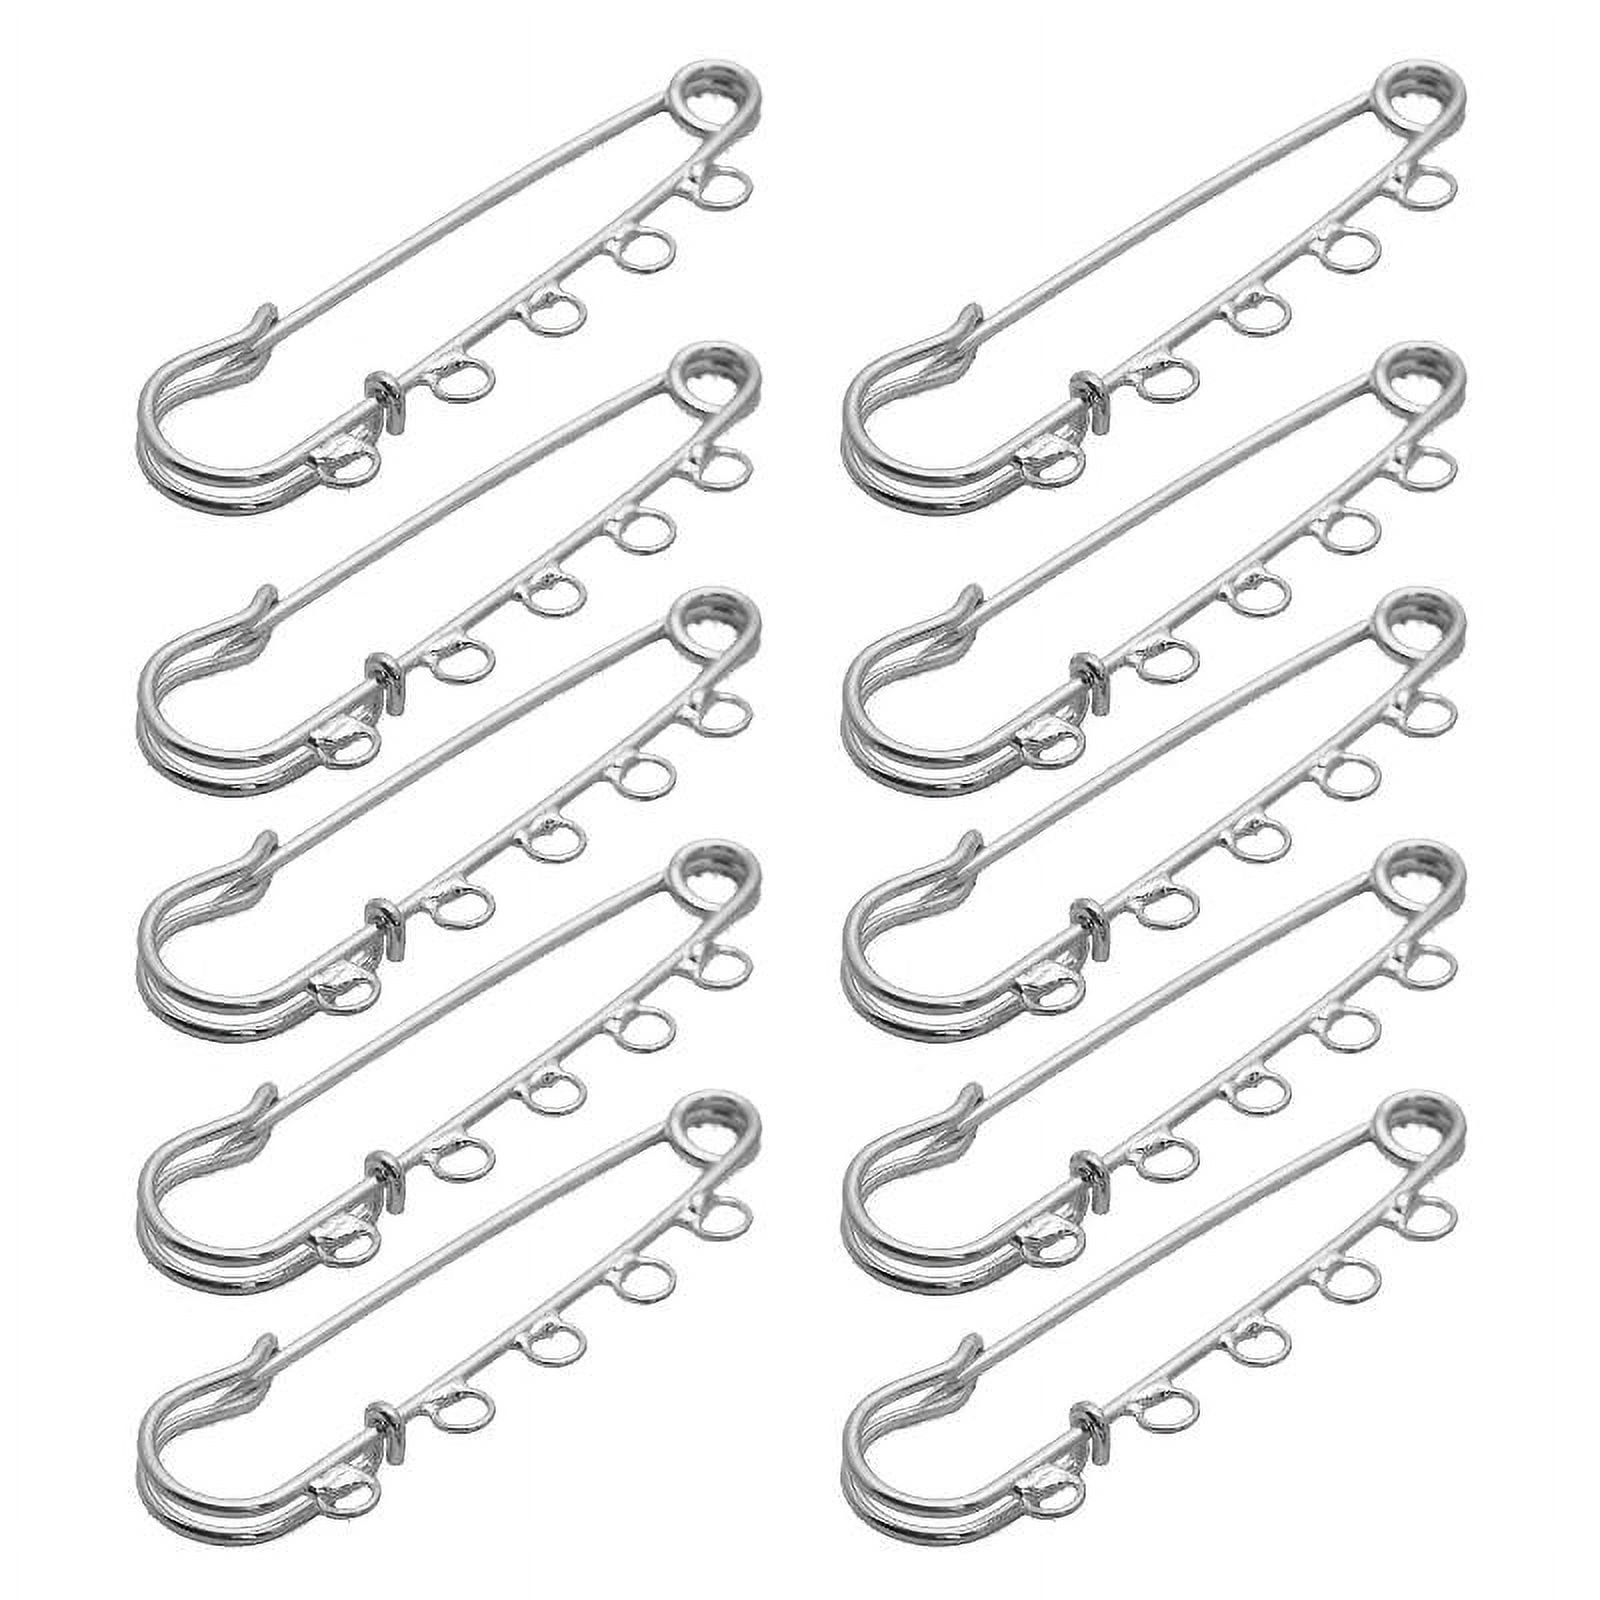 10PCS Heavy Duty Safety Pins Brooch Pins with 5 Holes for Blankets ...